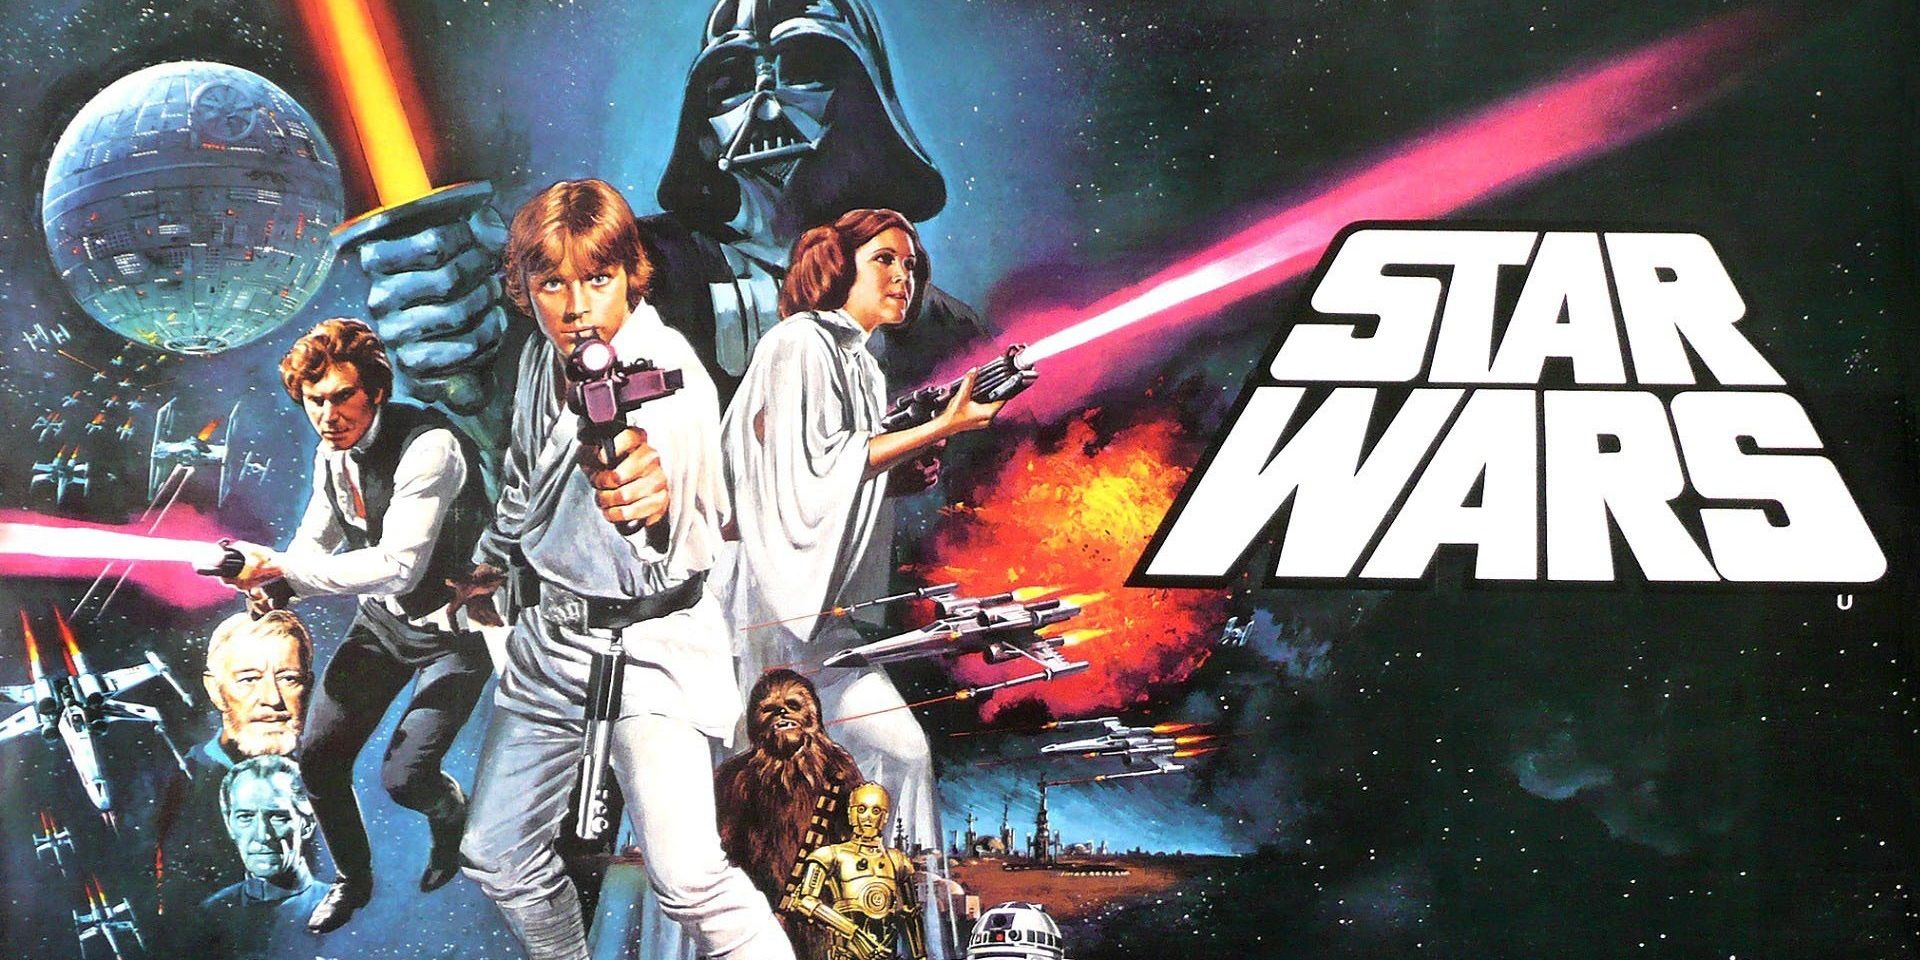 The poster for the original Star Wars movie